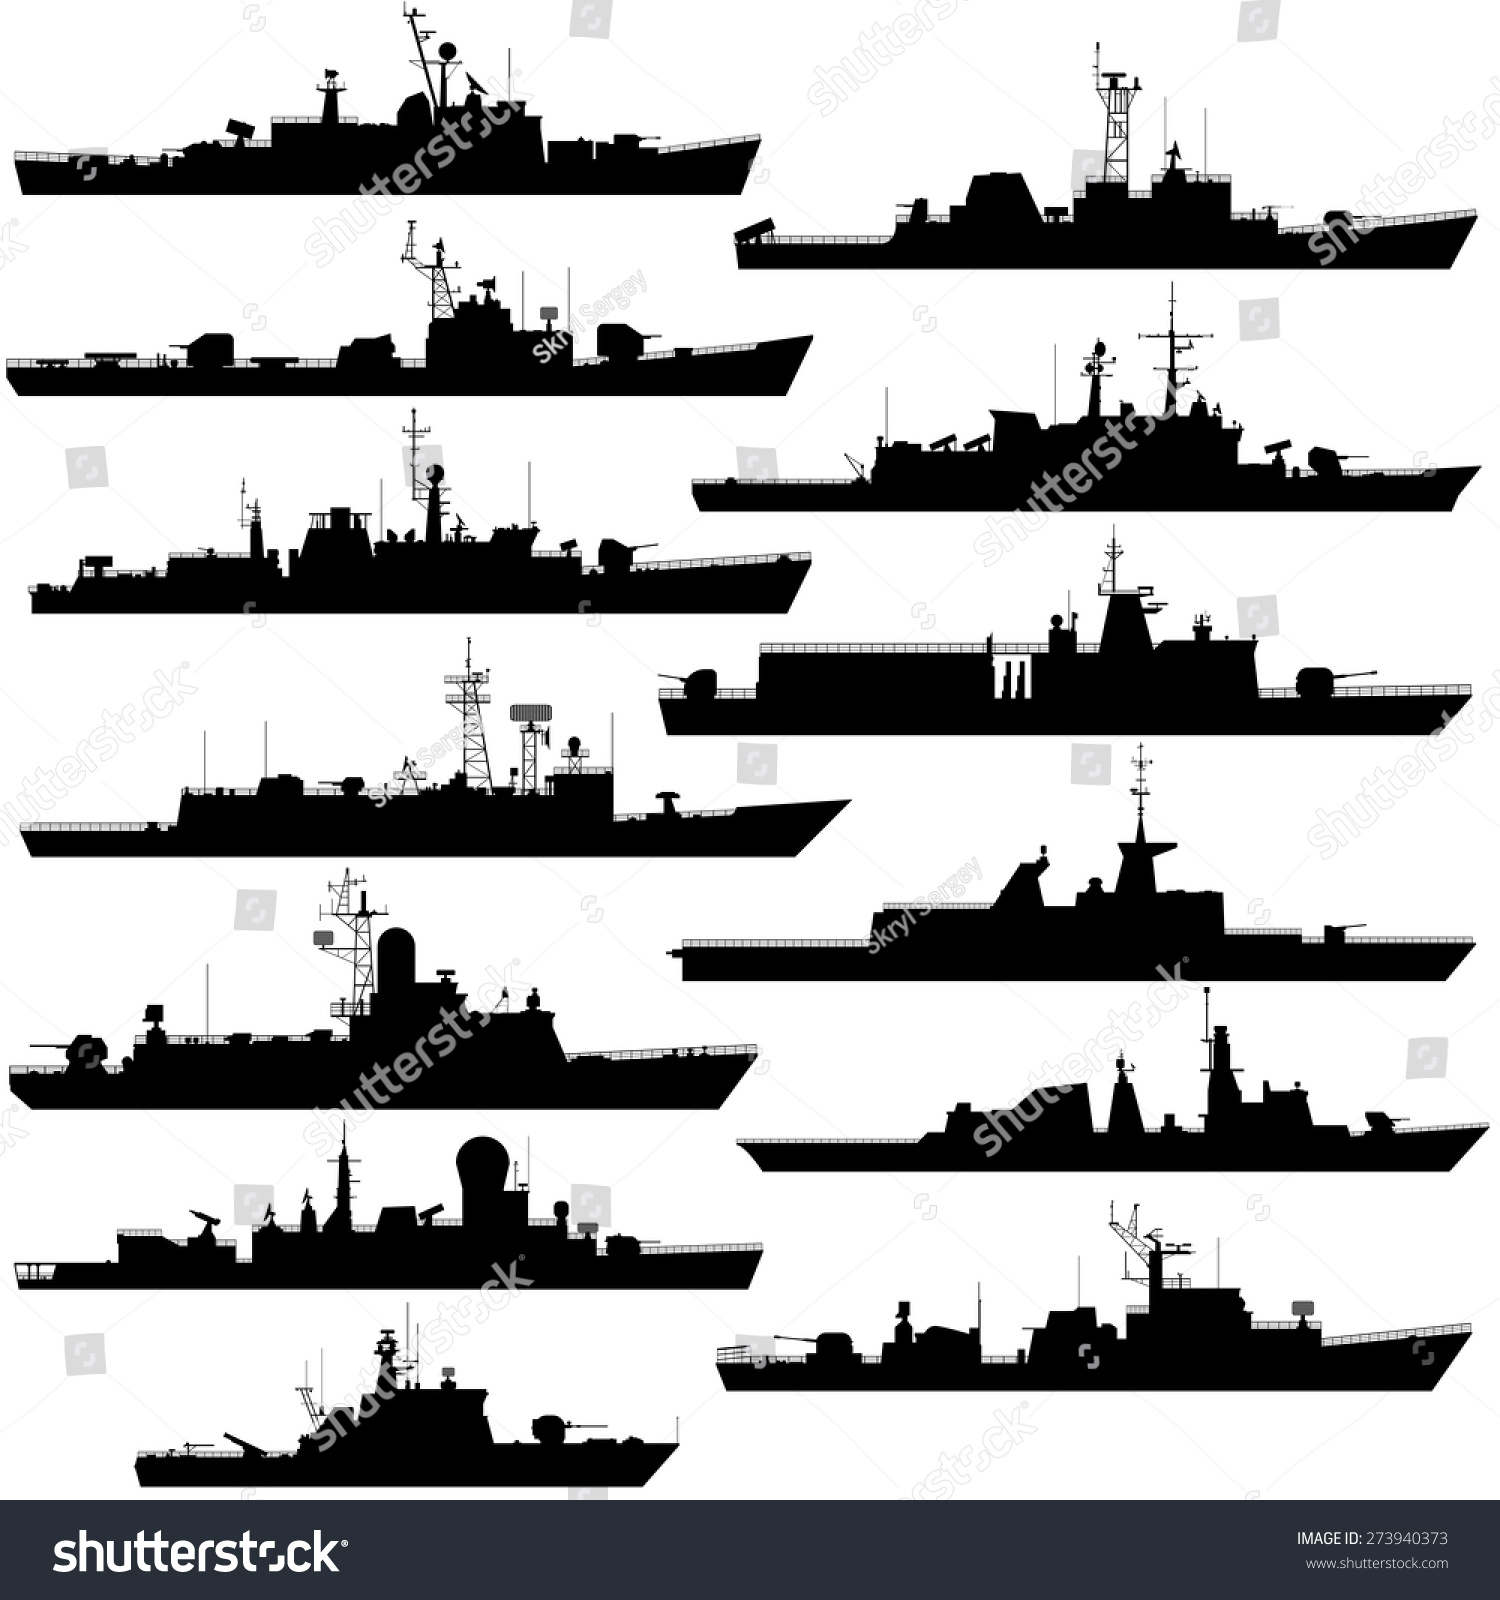 SVG of The contours of warships, frigates and corvettes. Illustration on white background. svg